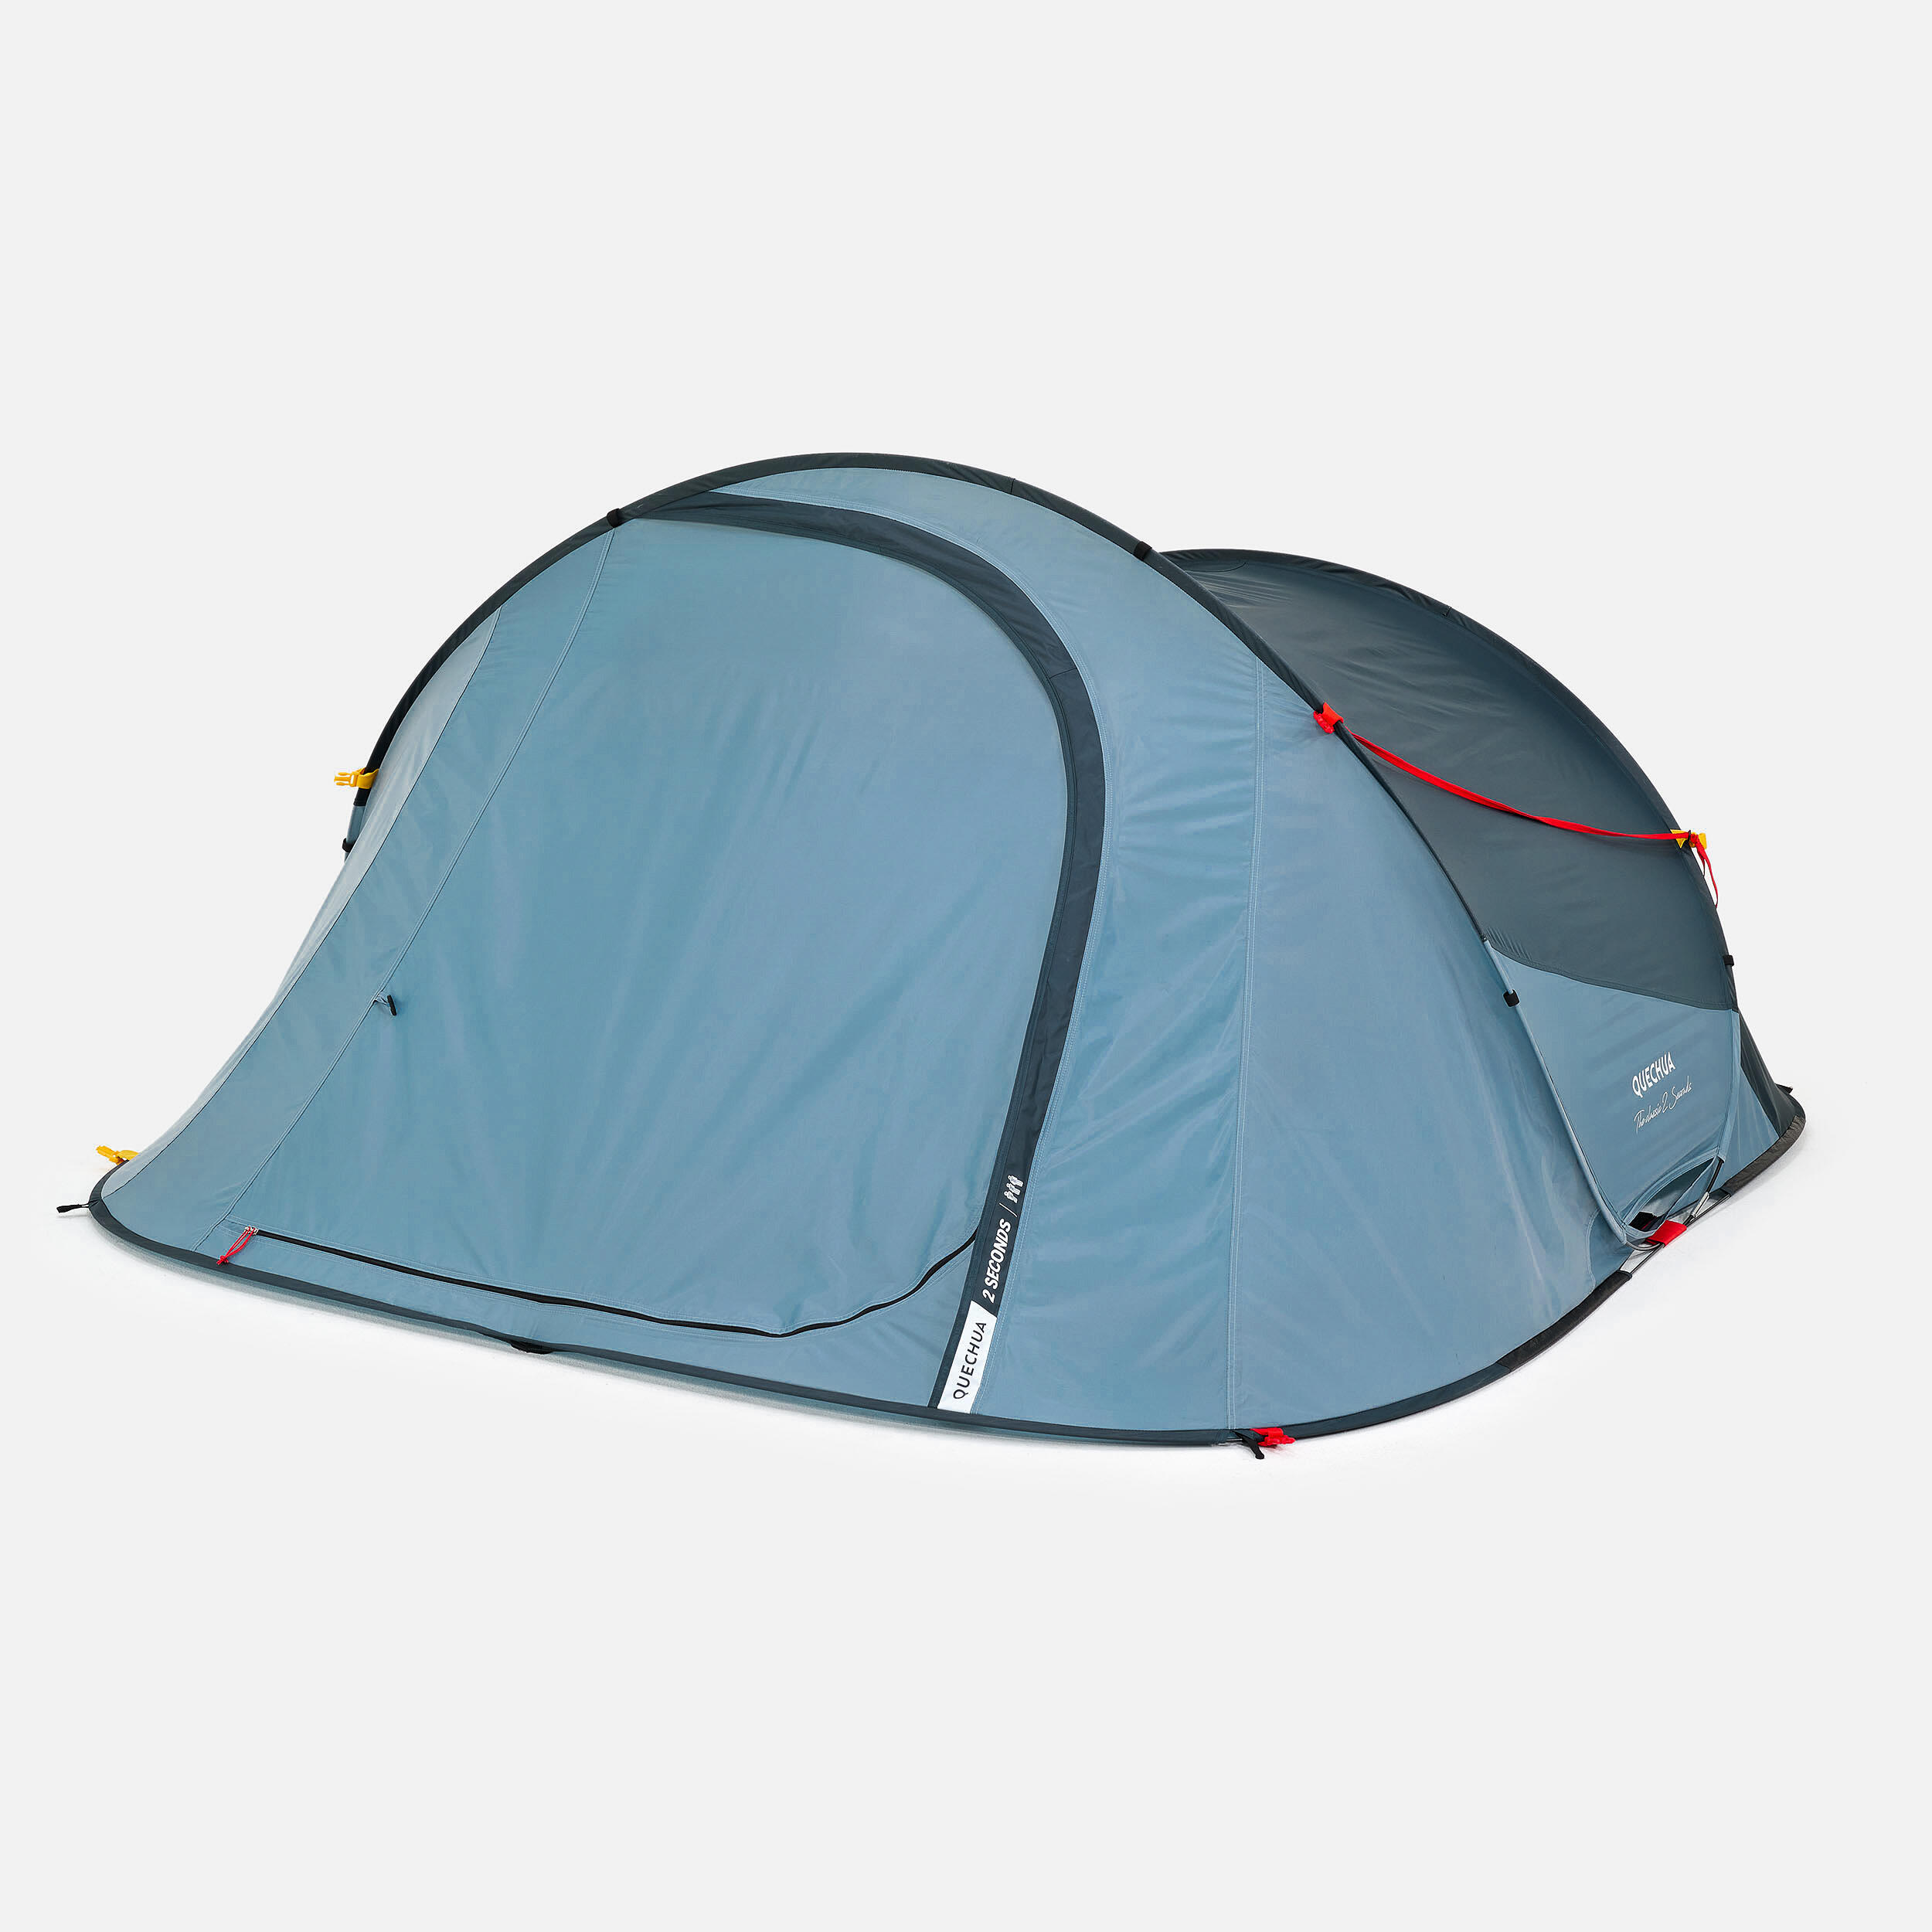 Camping tent - 2 SECONDS - 3-person 7/13